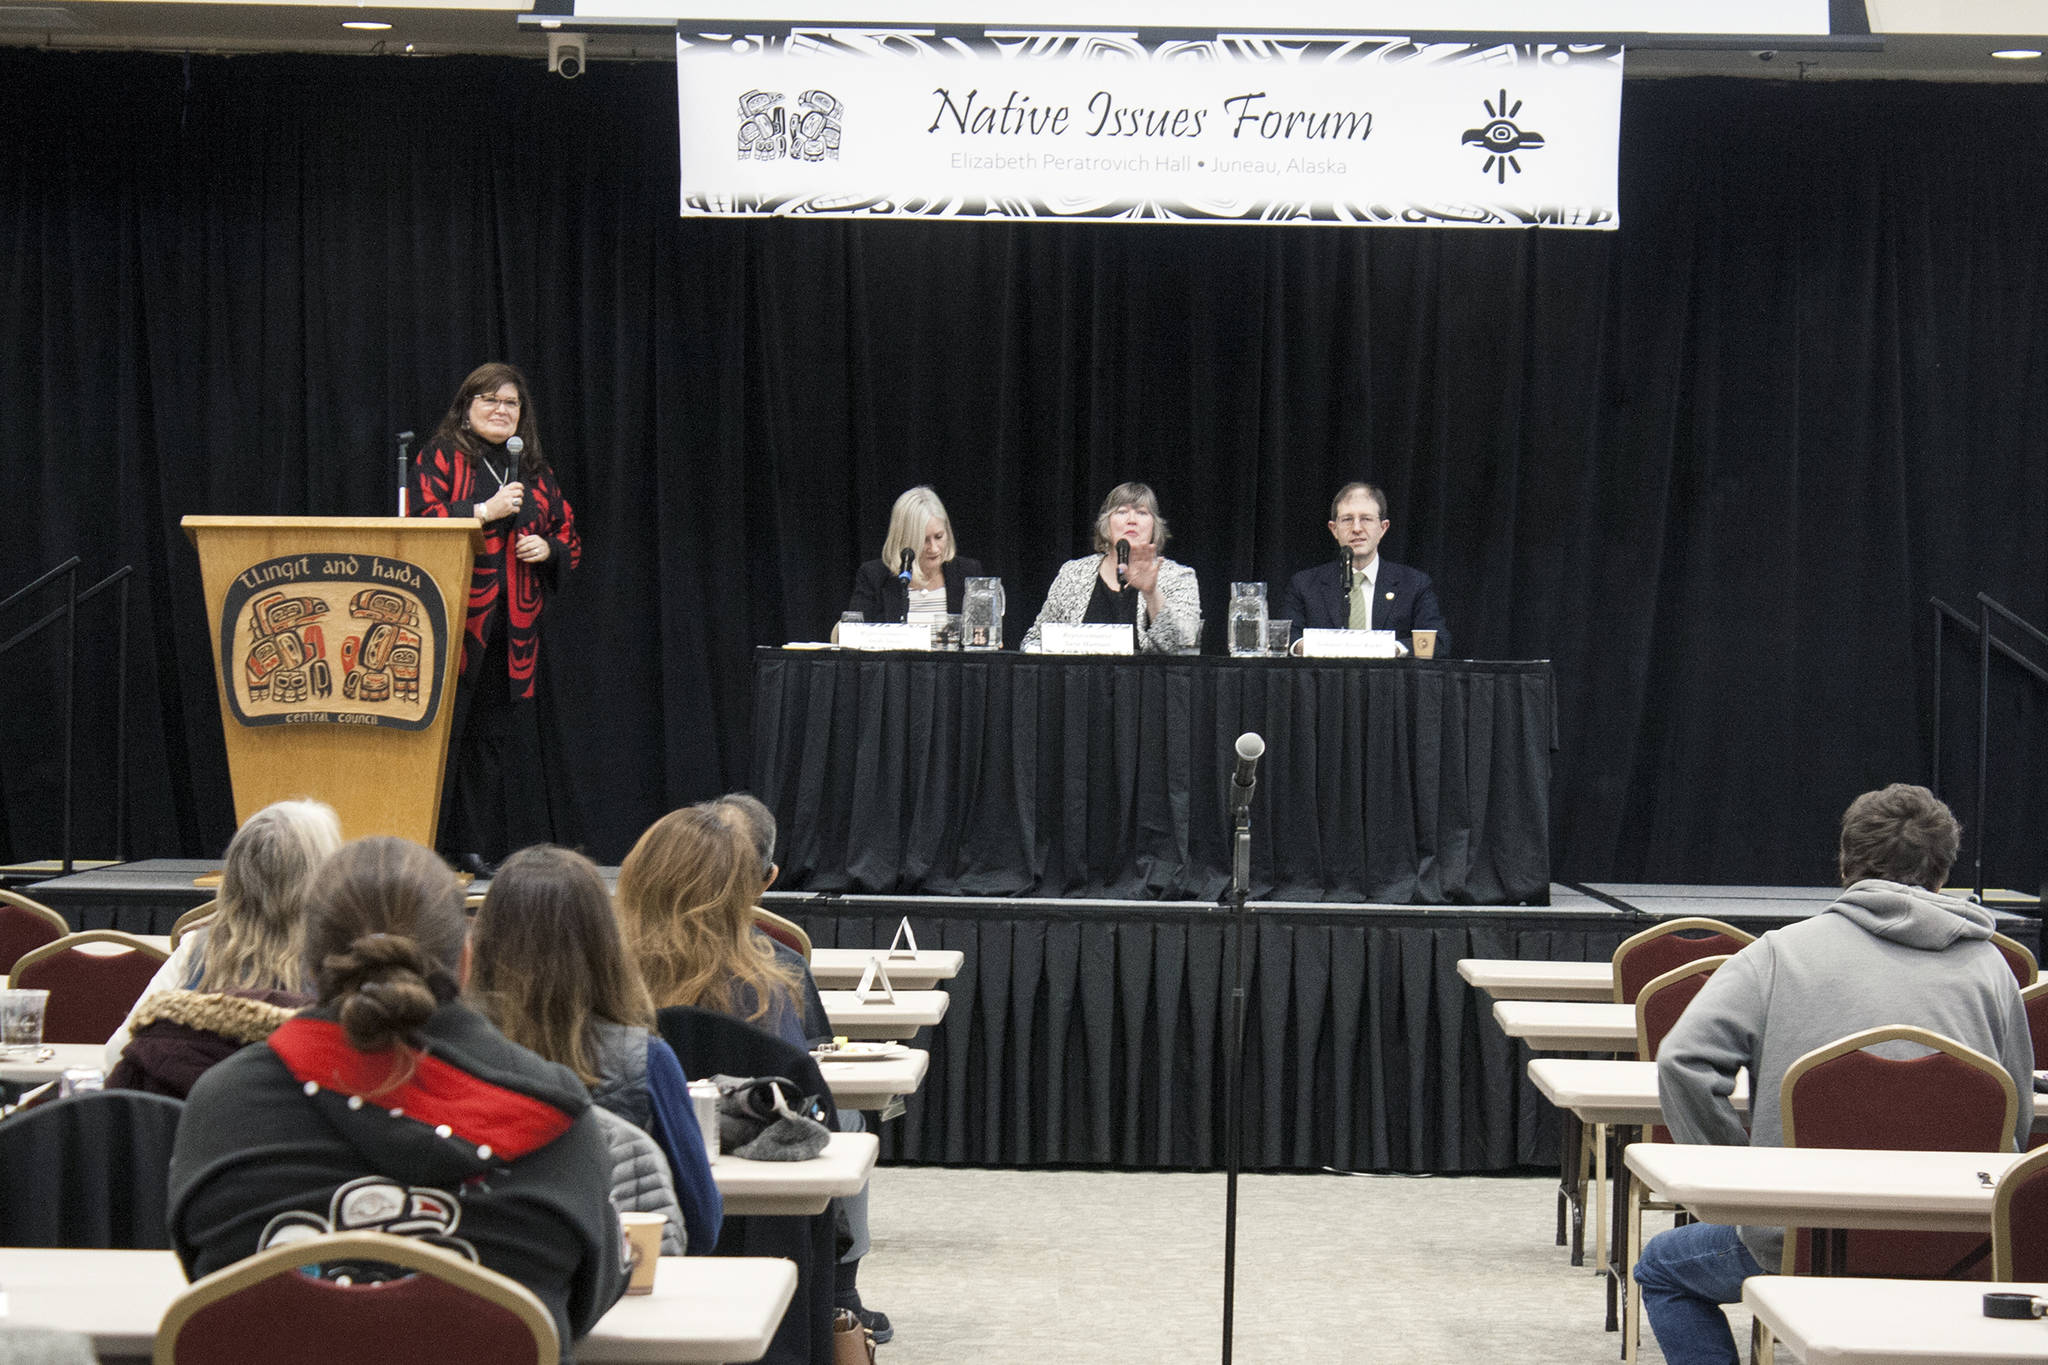 Capitol Live: Native Issues Forum